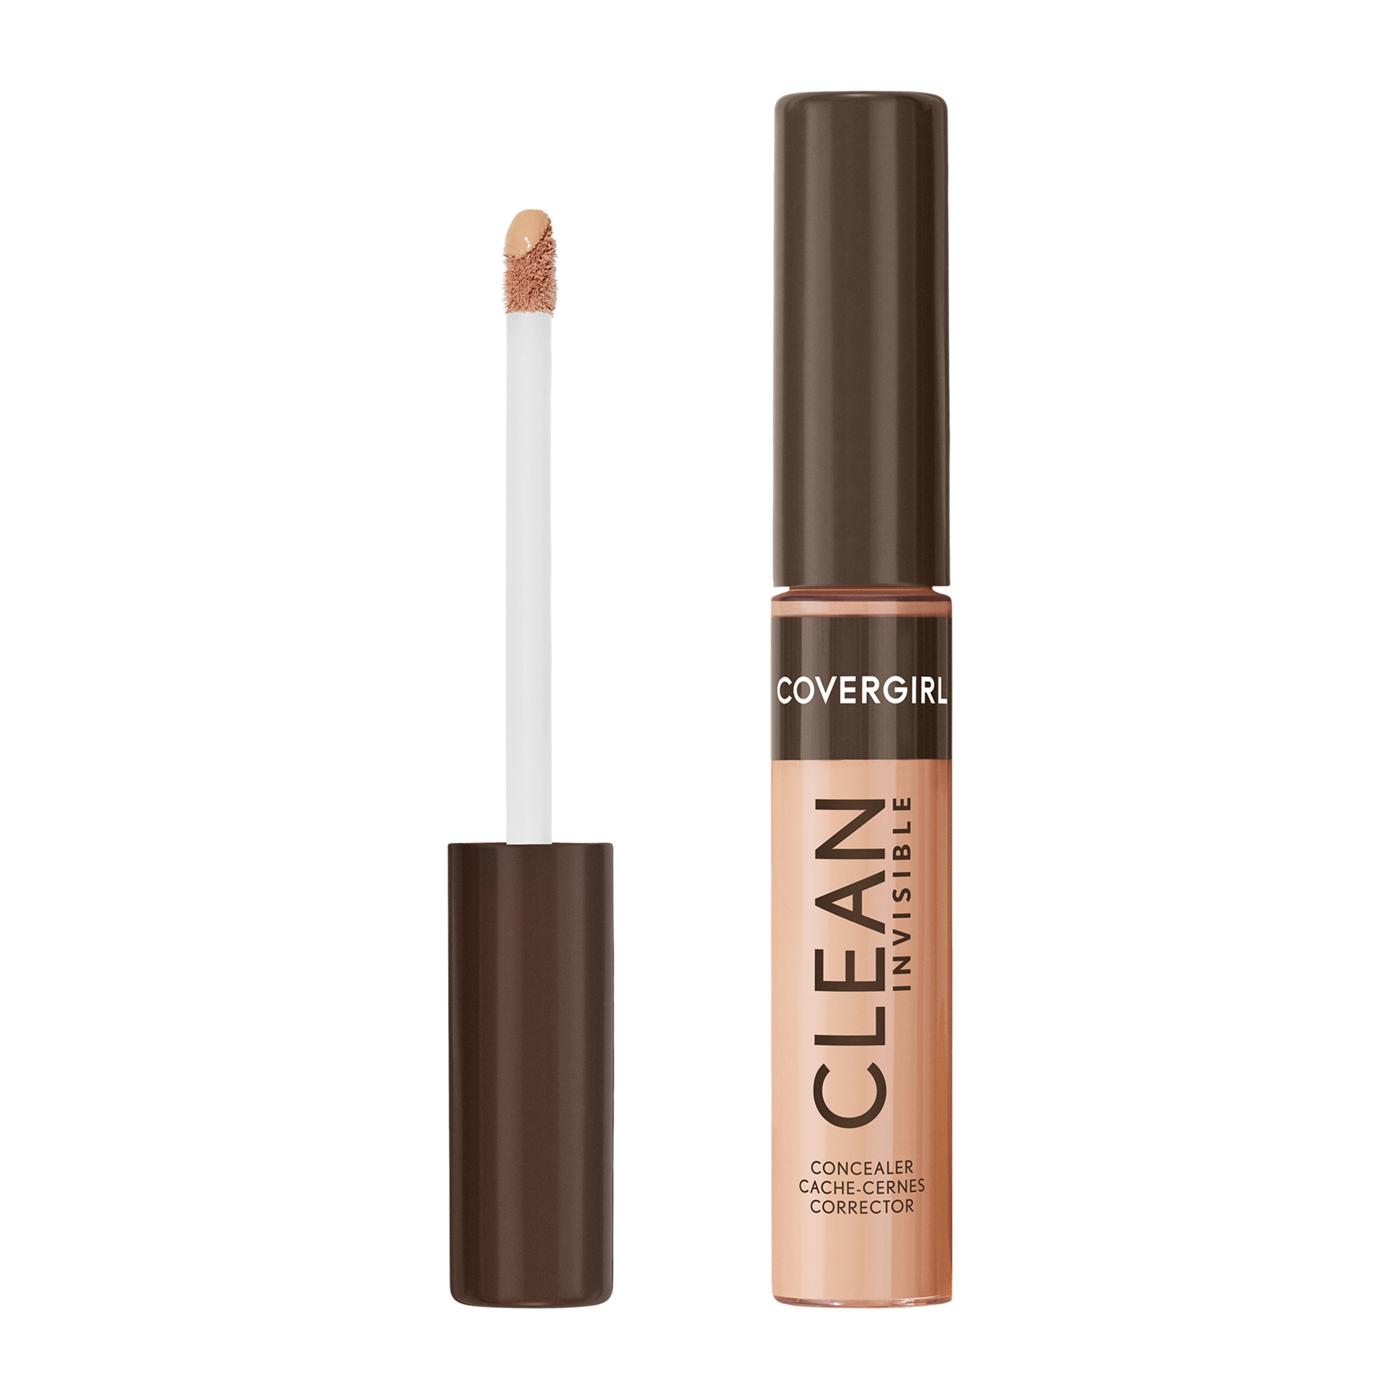 Covergirl Clean Invisible Concealer - Warm Nude; image 7 of 15